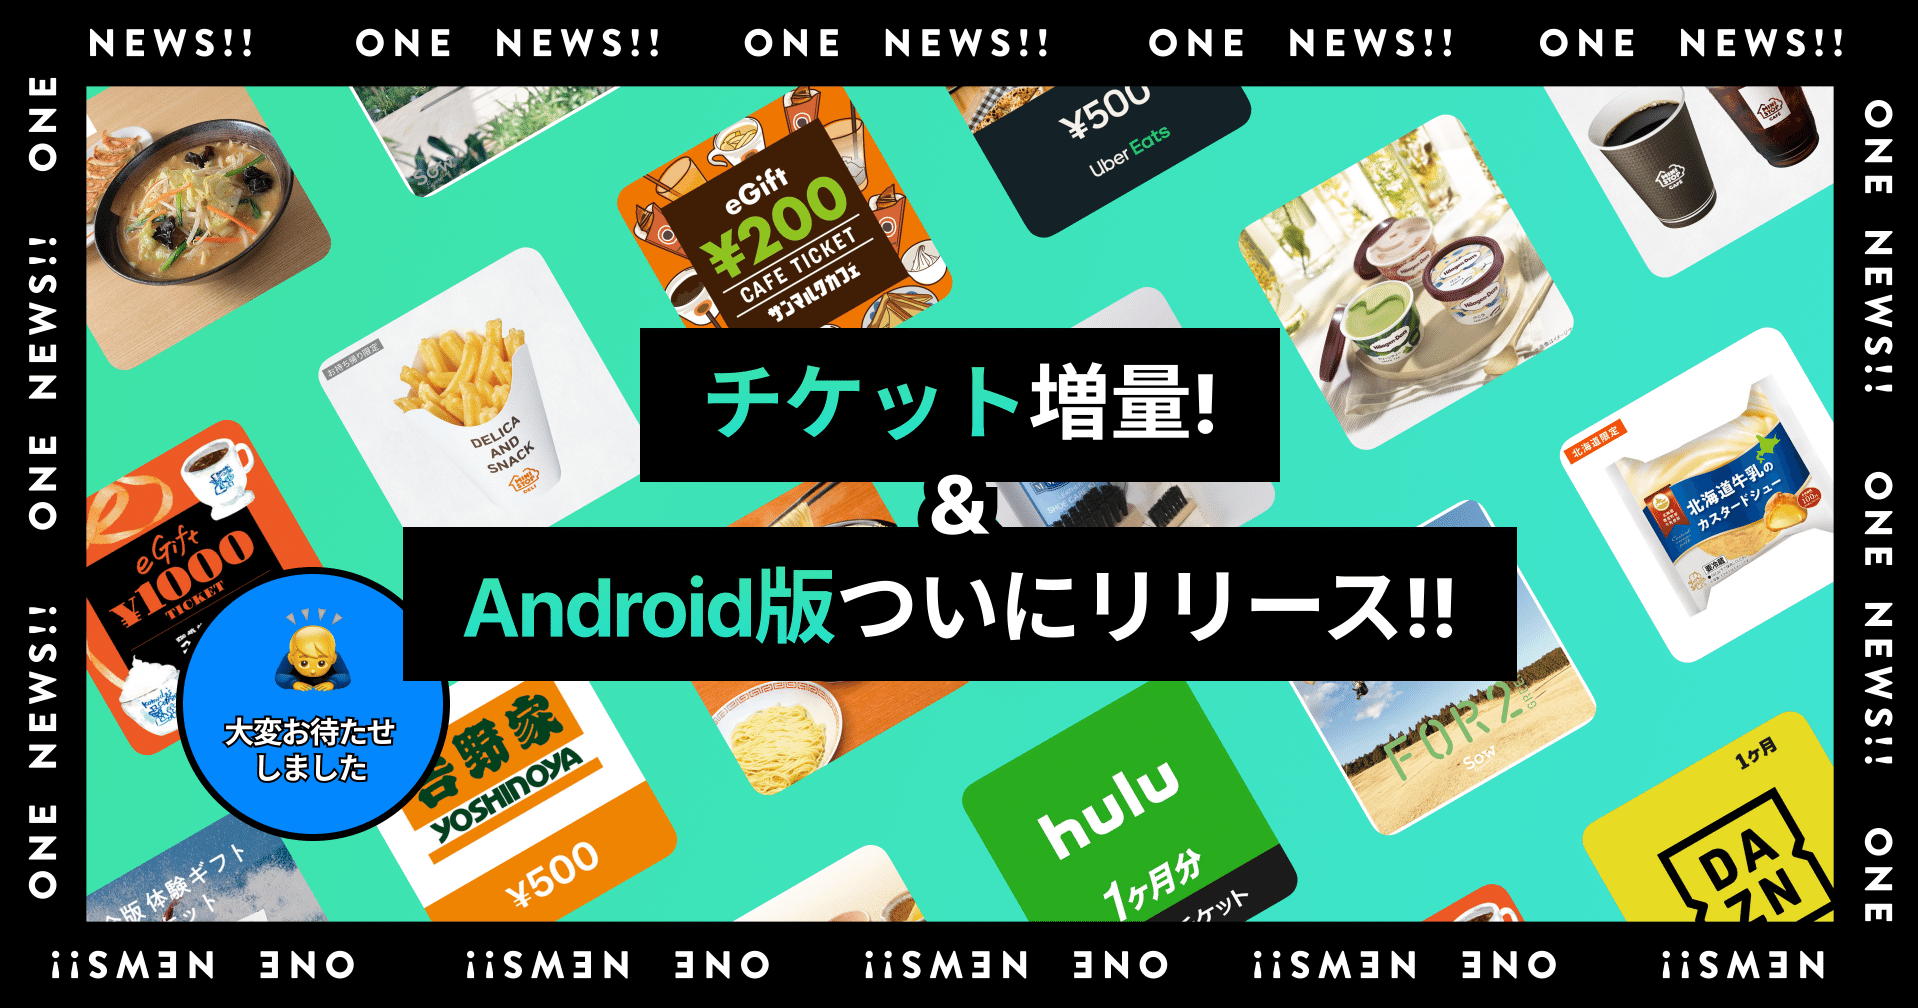 One News チケット機能をアップデートしました One ワン Note